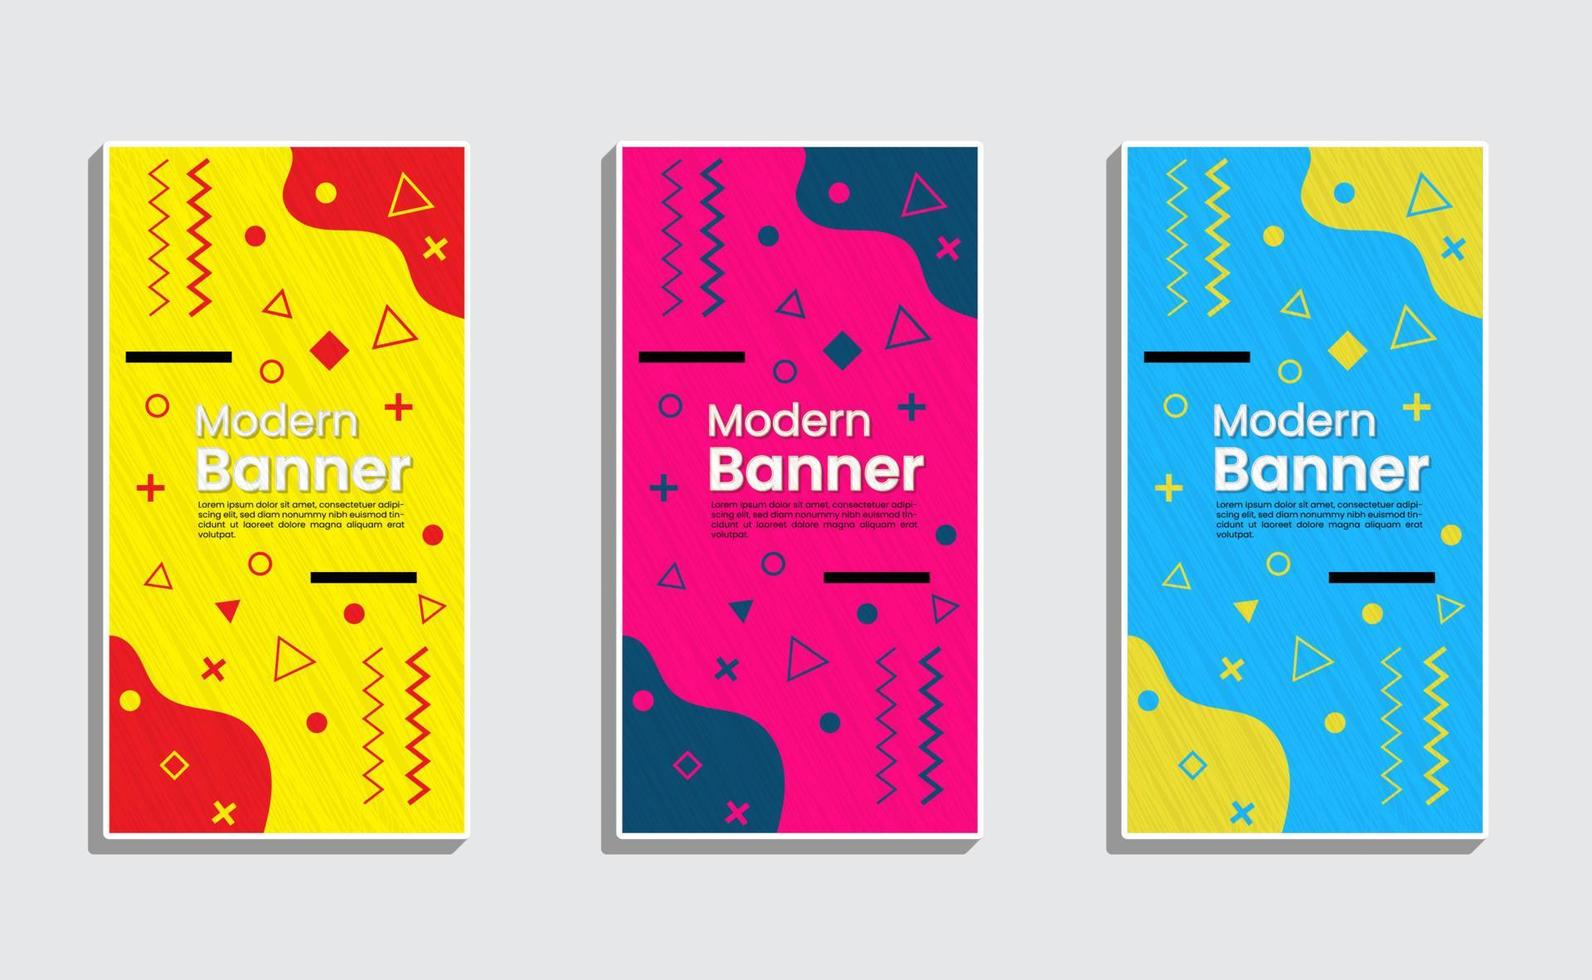 Vertical Banner Design - Modern Memphis Theme and Color Options Available. vector